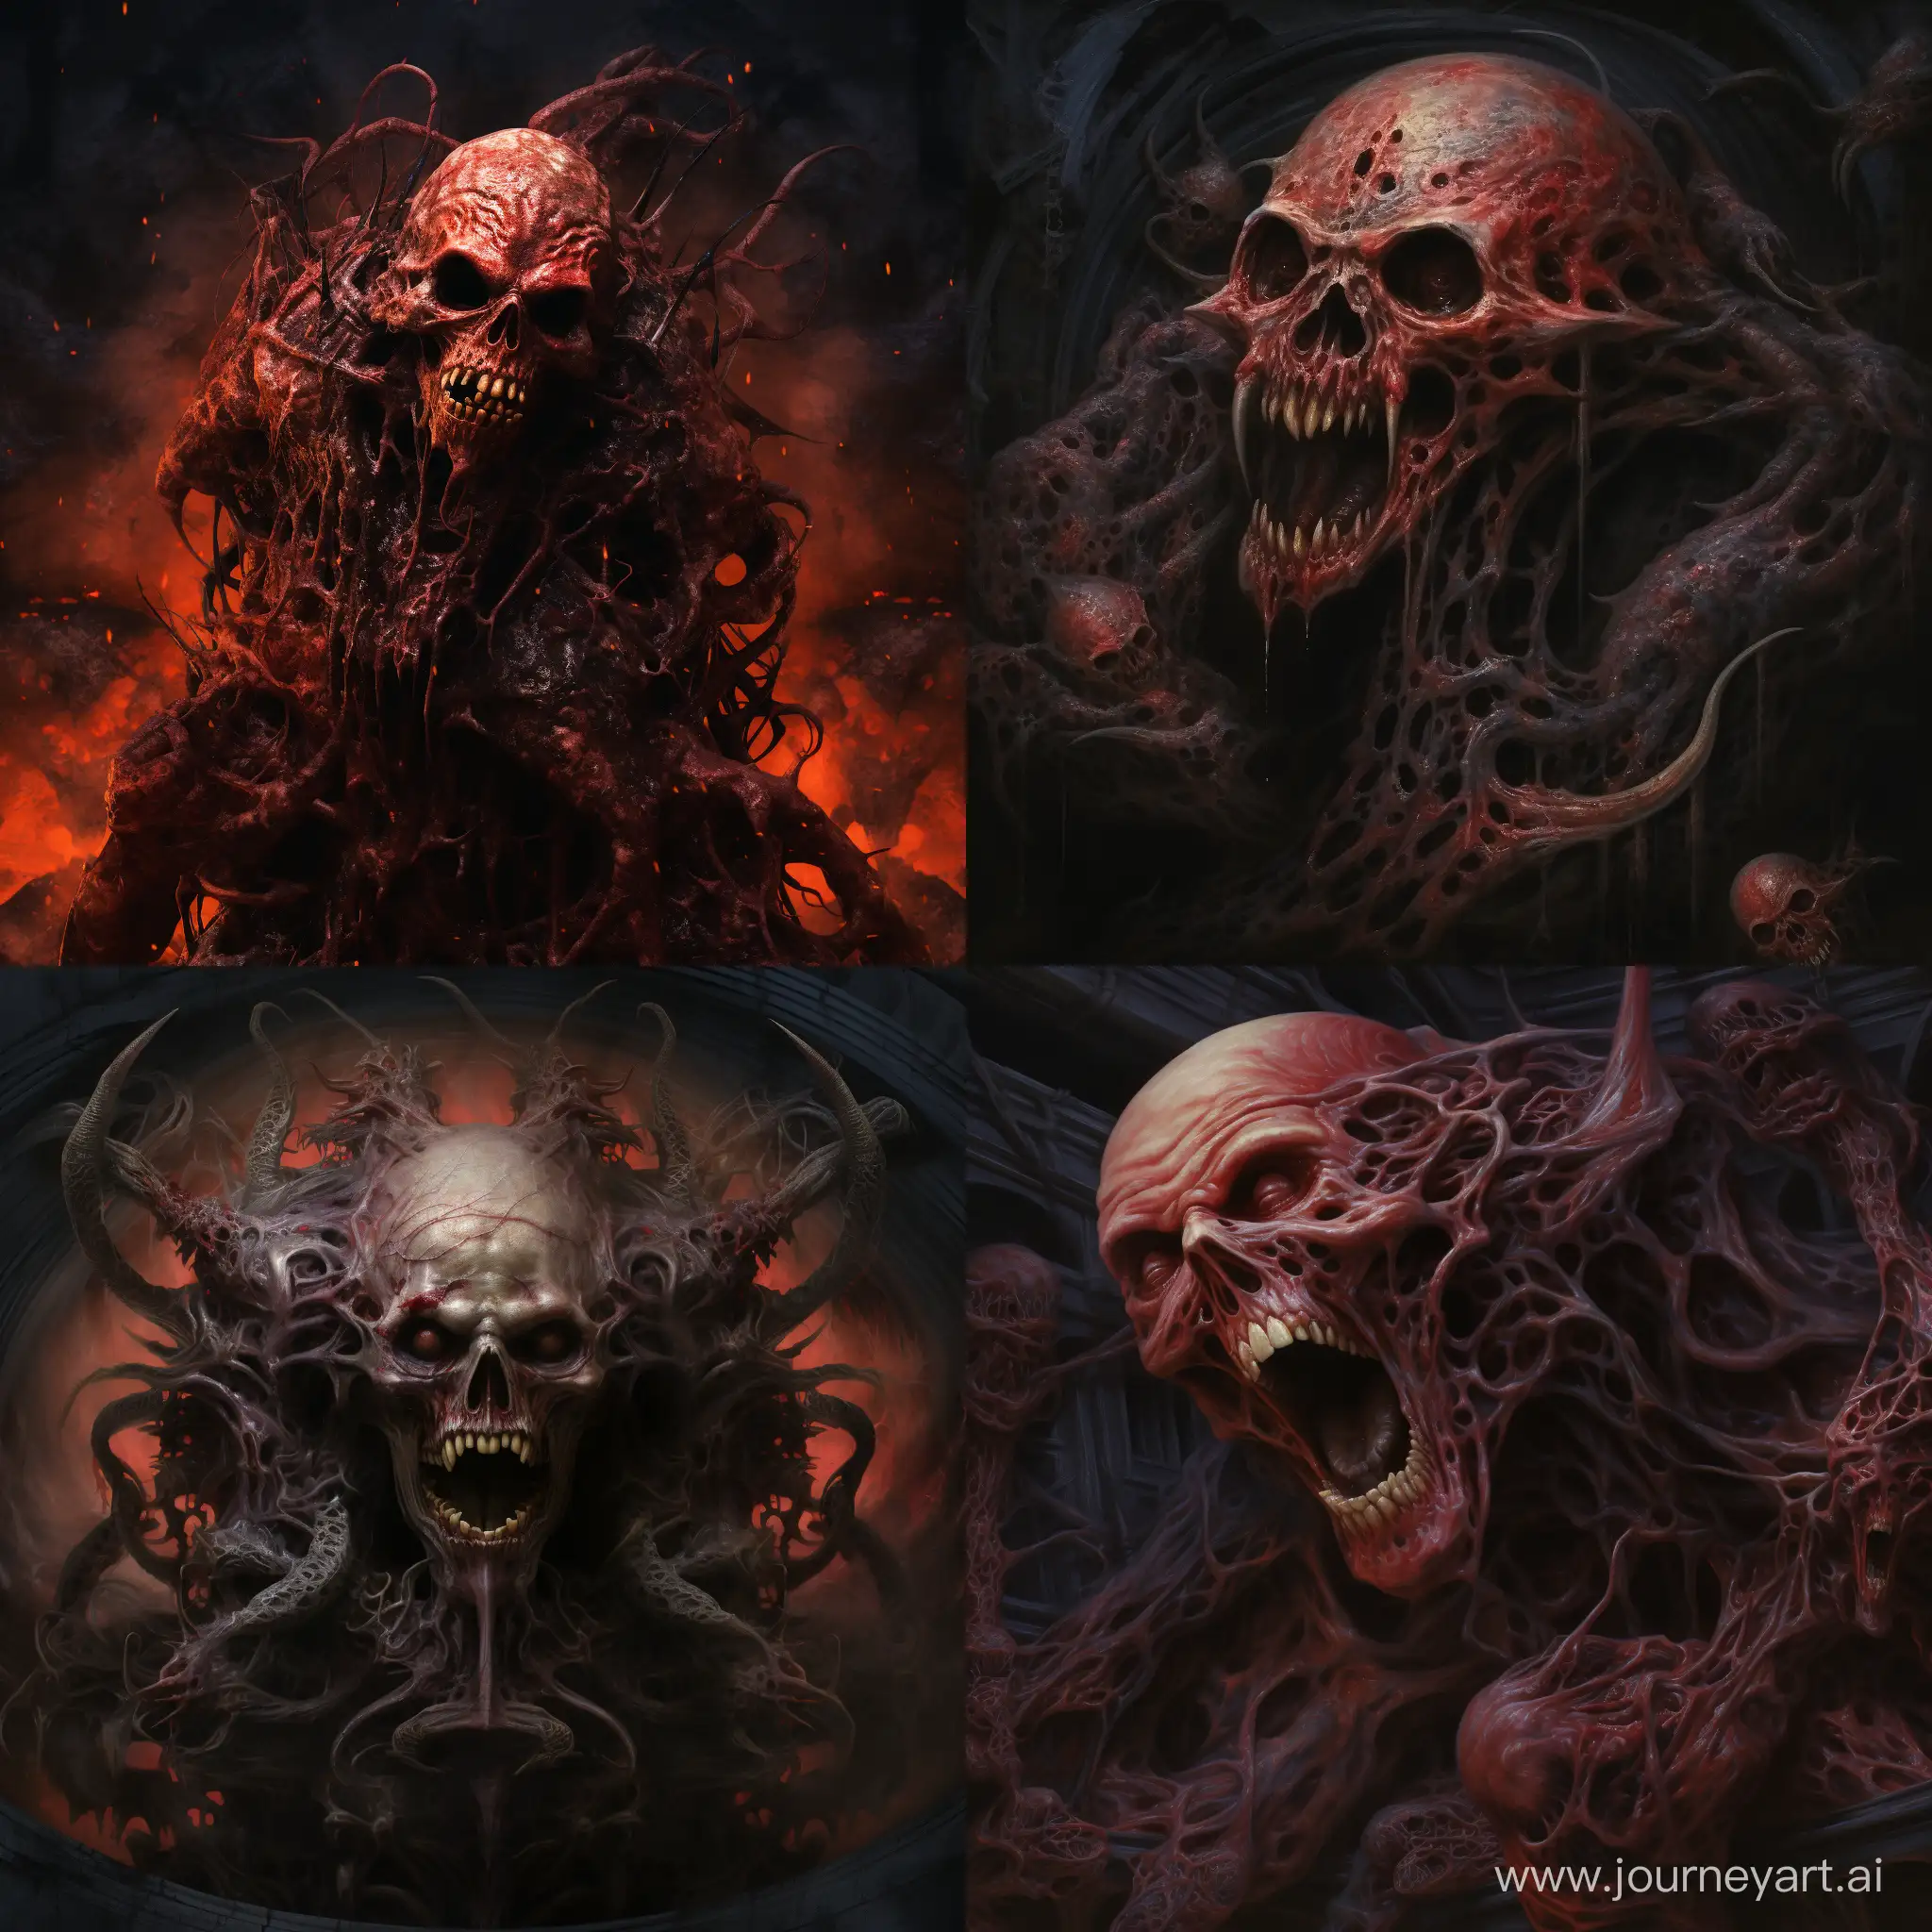  Full body  scene Dark expressionism, Intertwined bodies, Occult :: frightening, growling painting, devouring happiness and souls, symmetrical epic fa. Full scene Photoportrait, cinematic :: two hideous creatures made of human flesh, head Octopus,